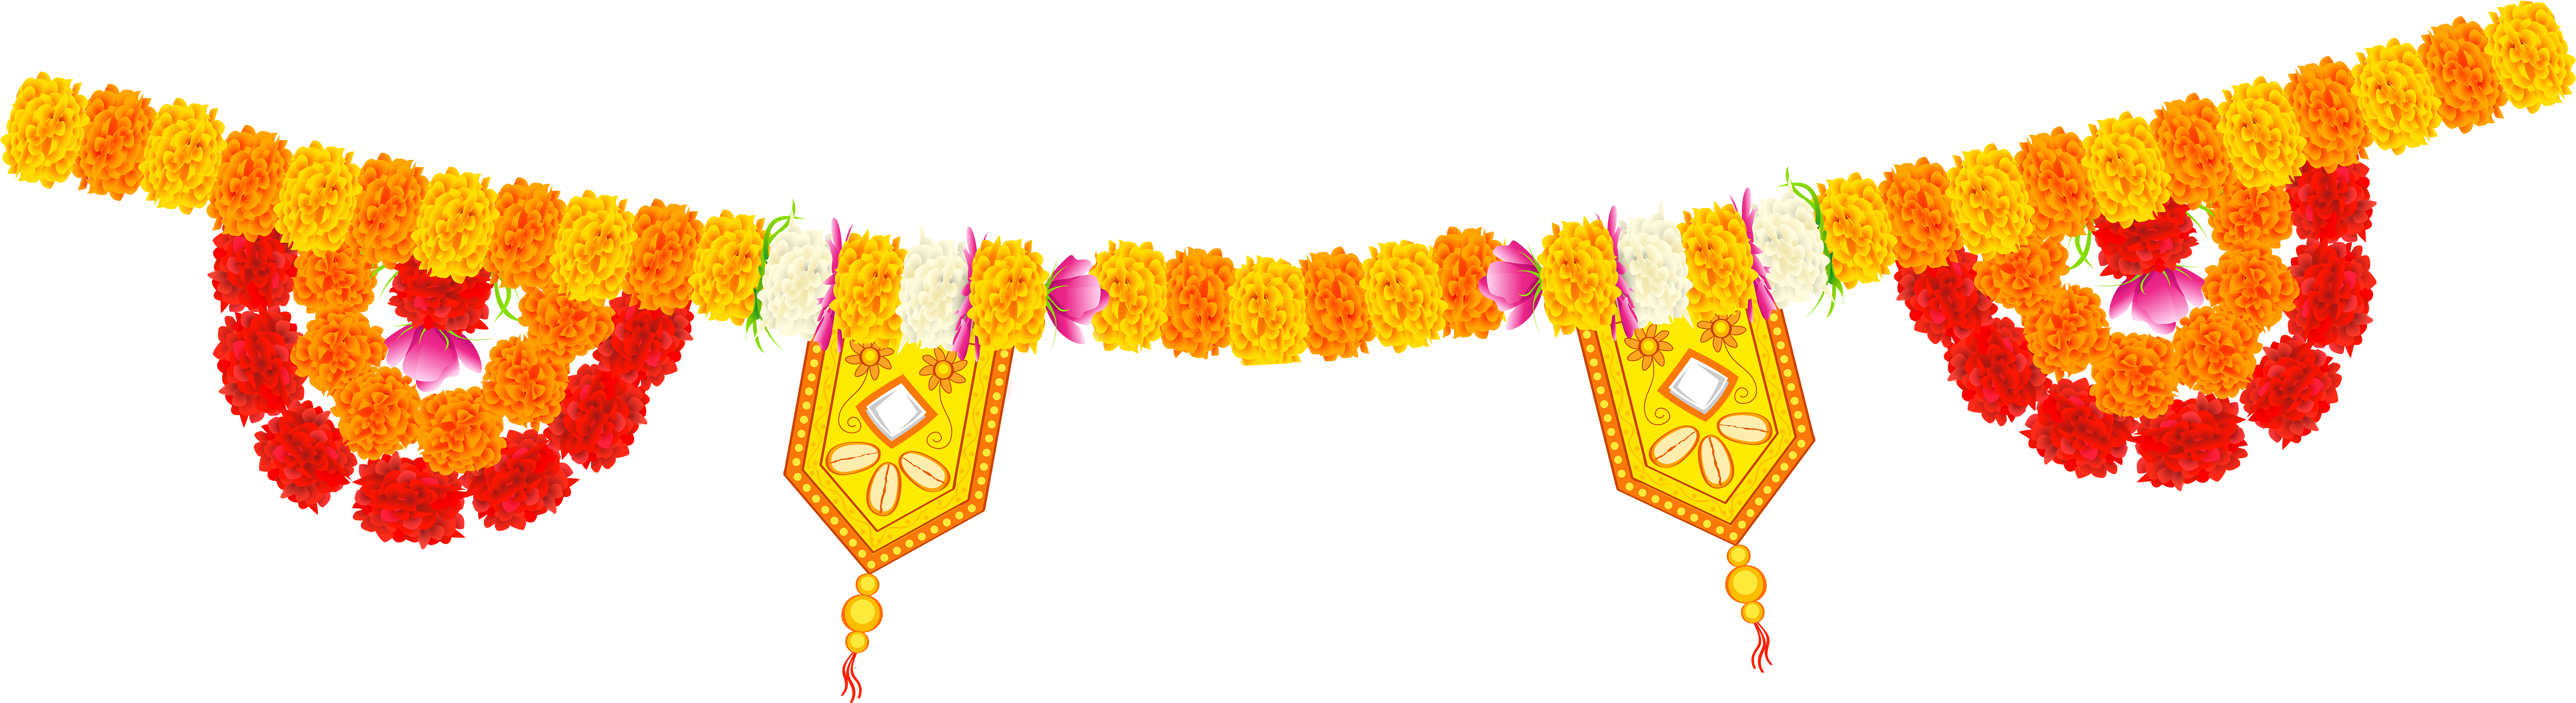 Traditional Indian Floral Decoration Garland.png PNG